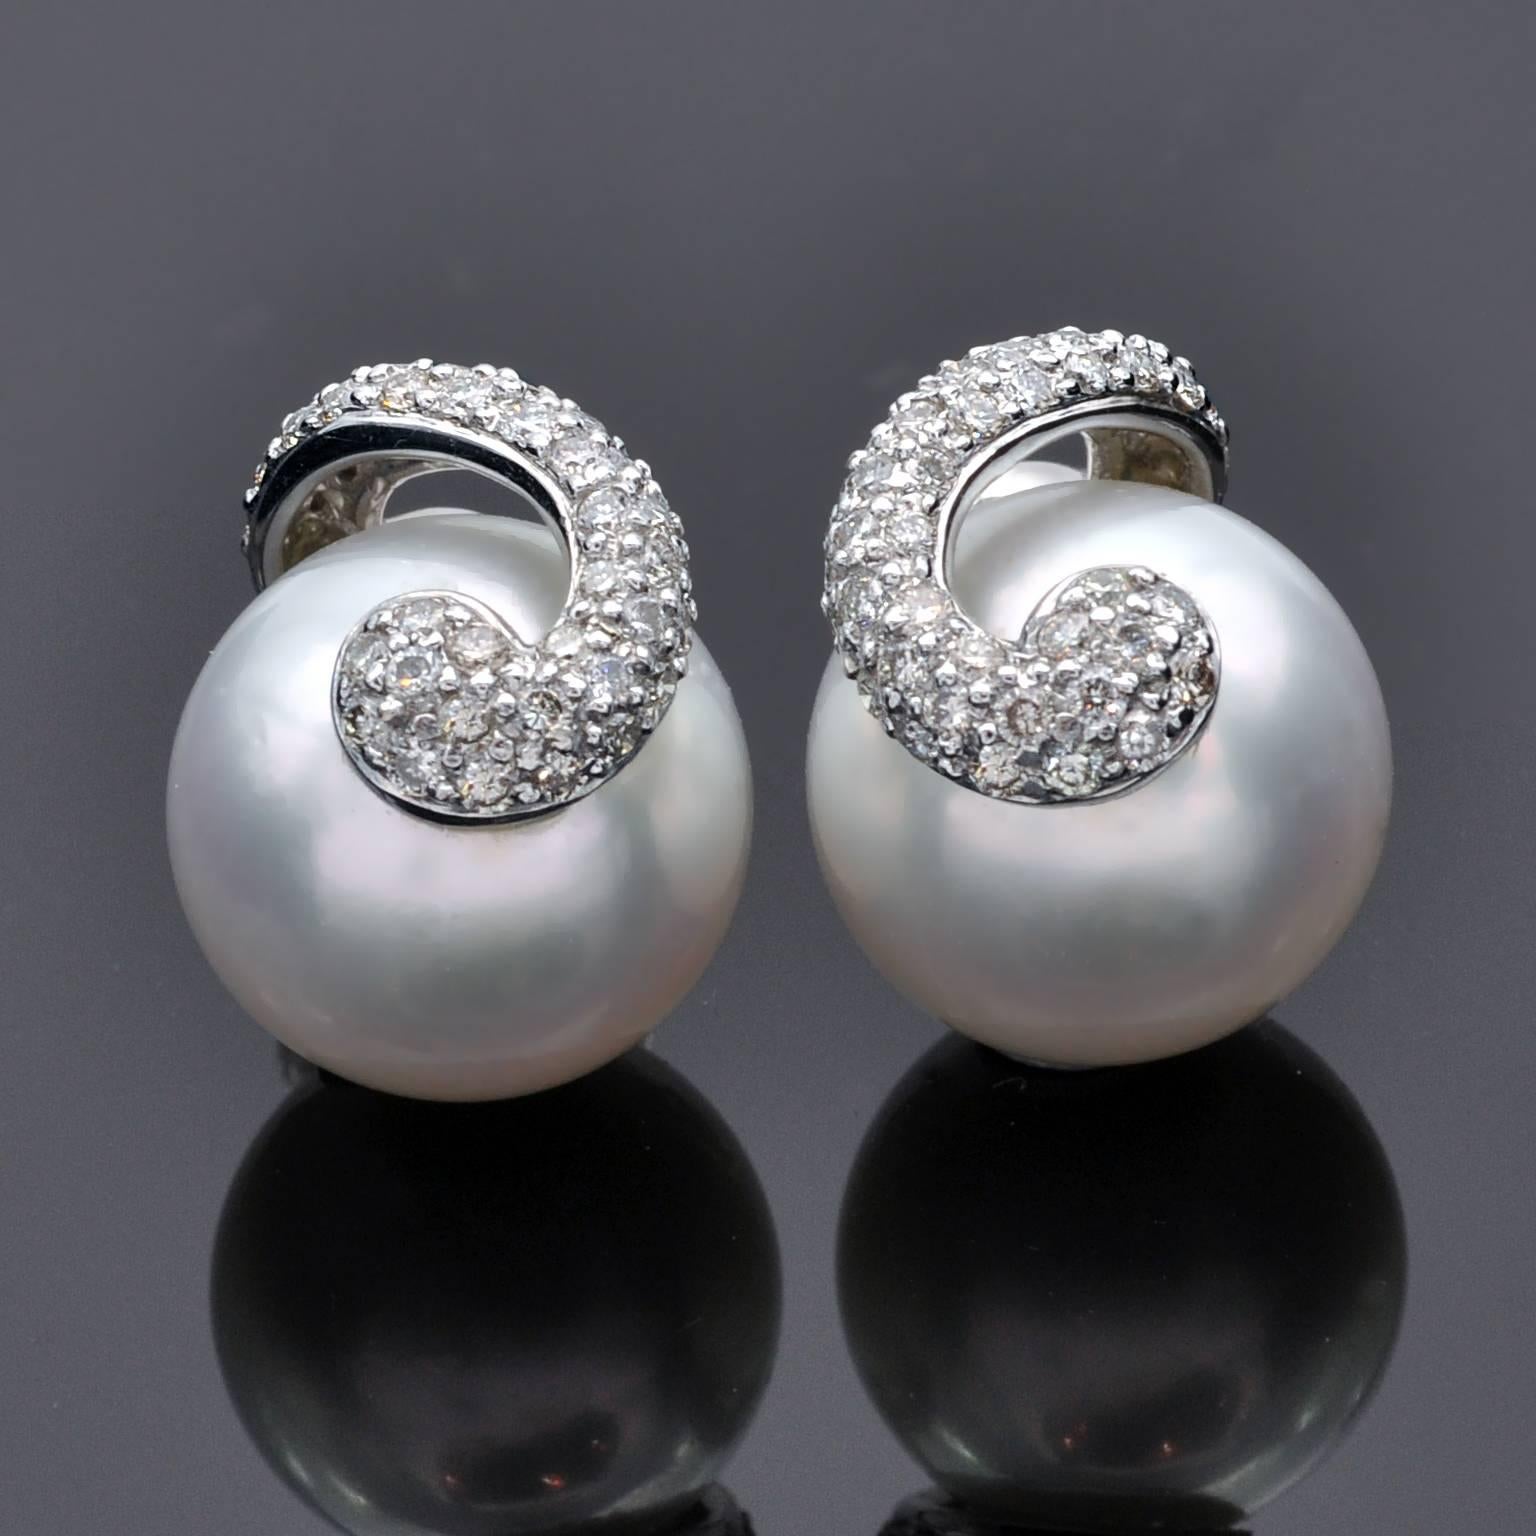 Elegant stud earrings : two 18 karat white gold curl motive set with 1.01 carat of diamonds which highlights two 12mm round white pearl.
